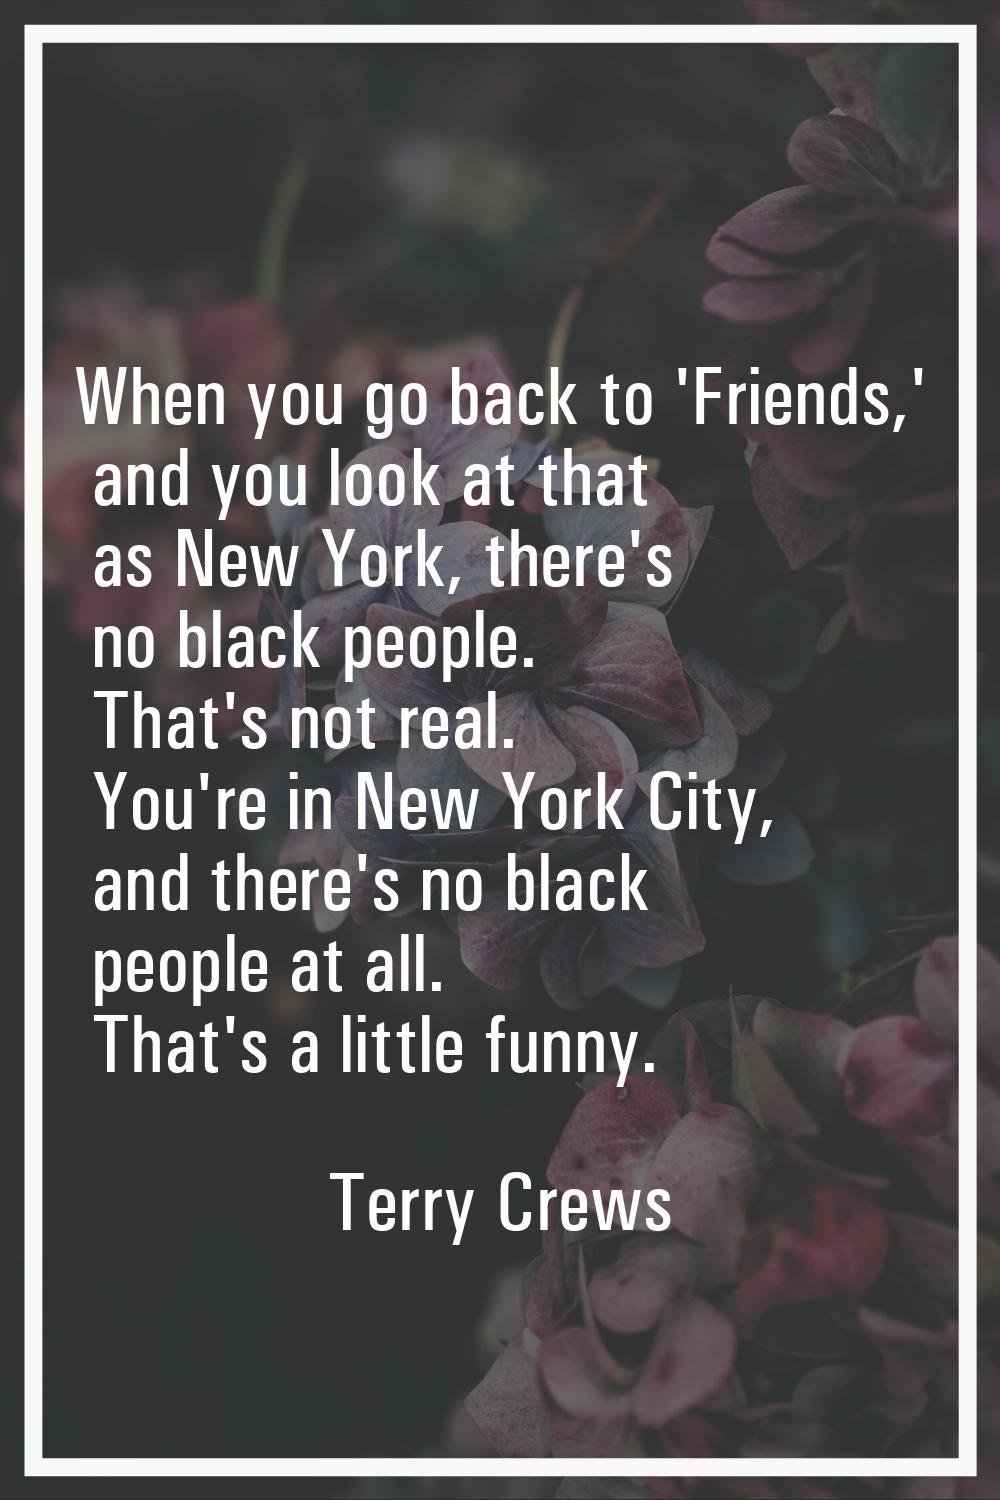 When you go back to 'Friends,' and you look at that as New York, there's no black people. That's no